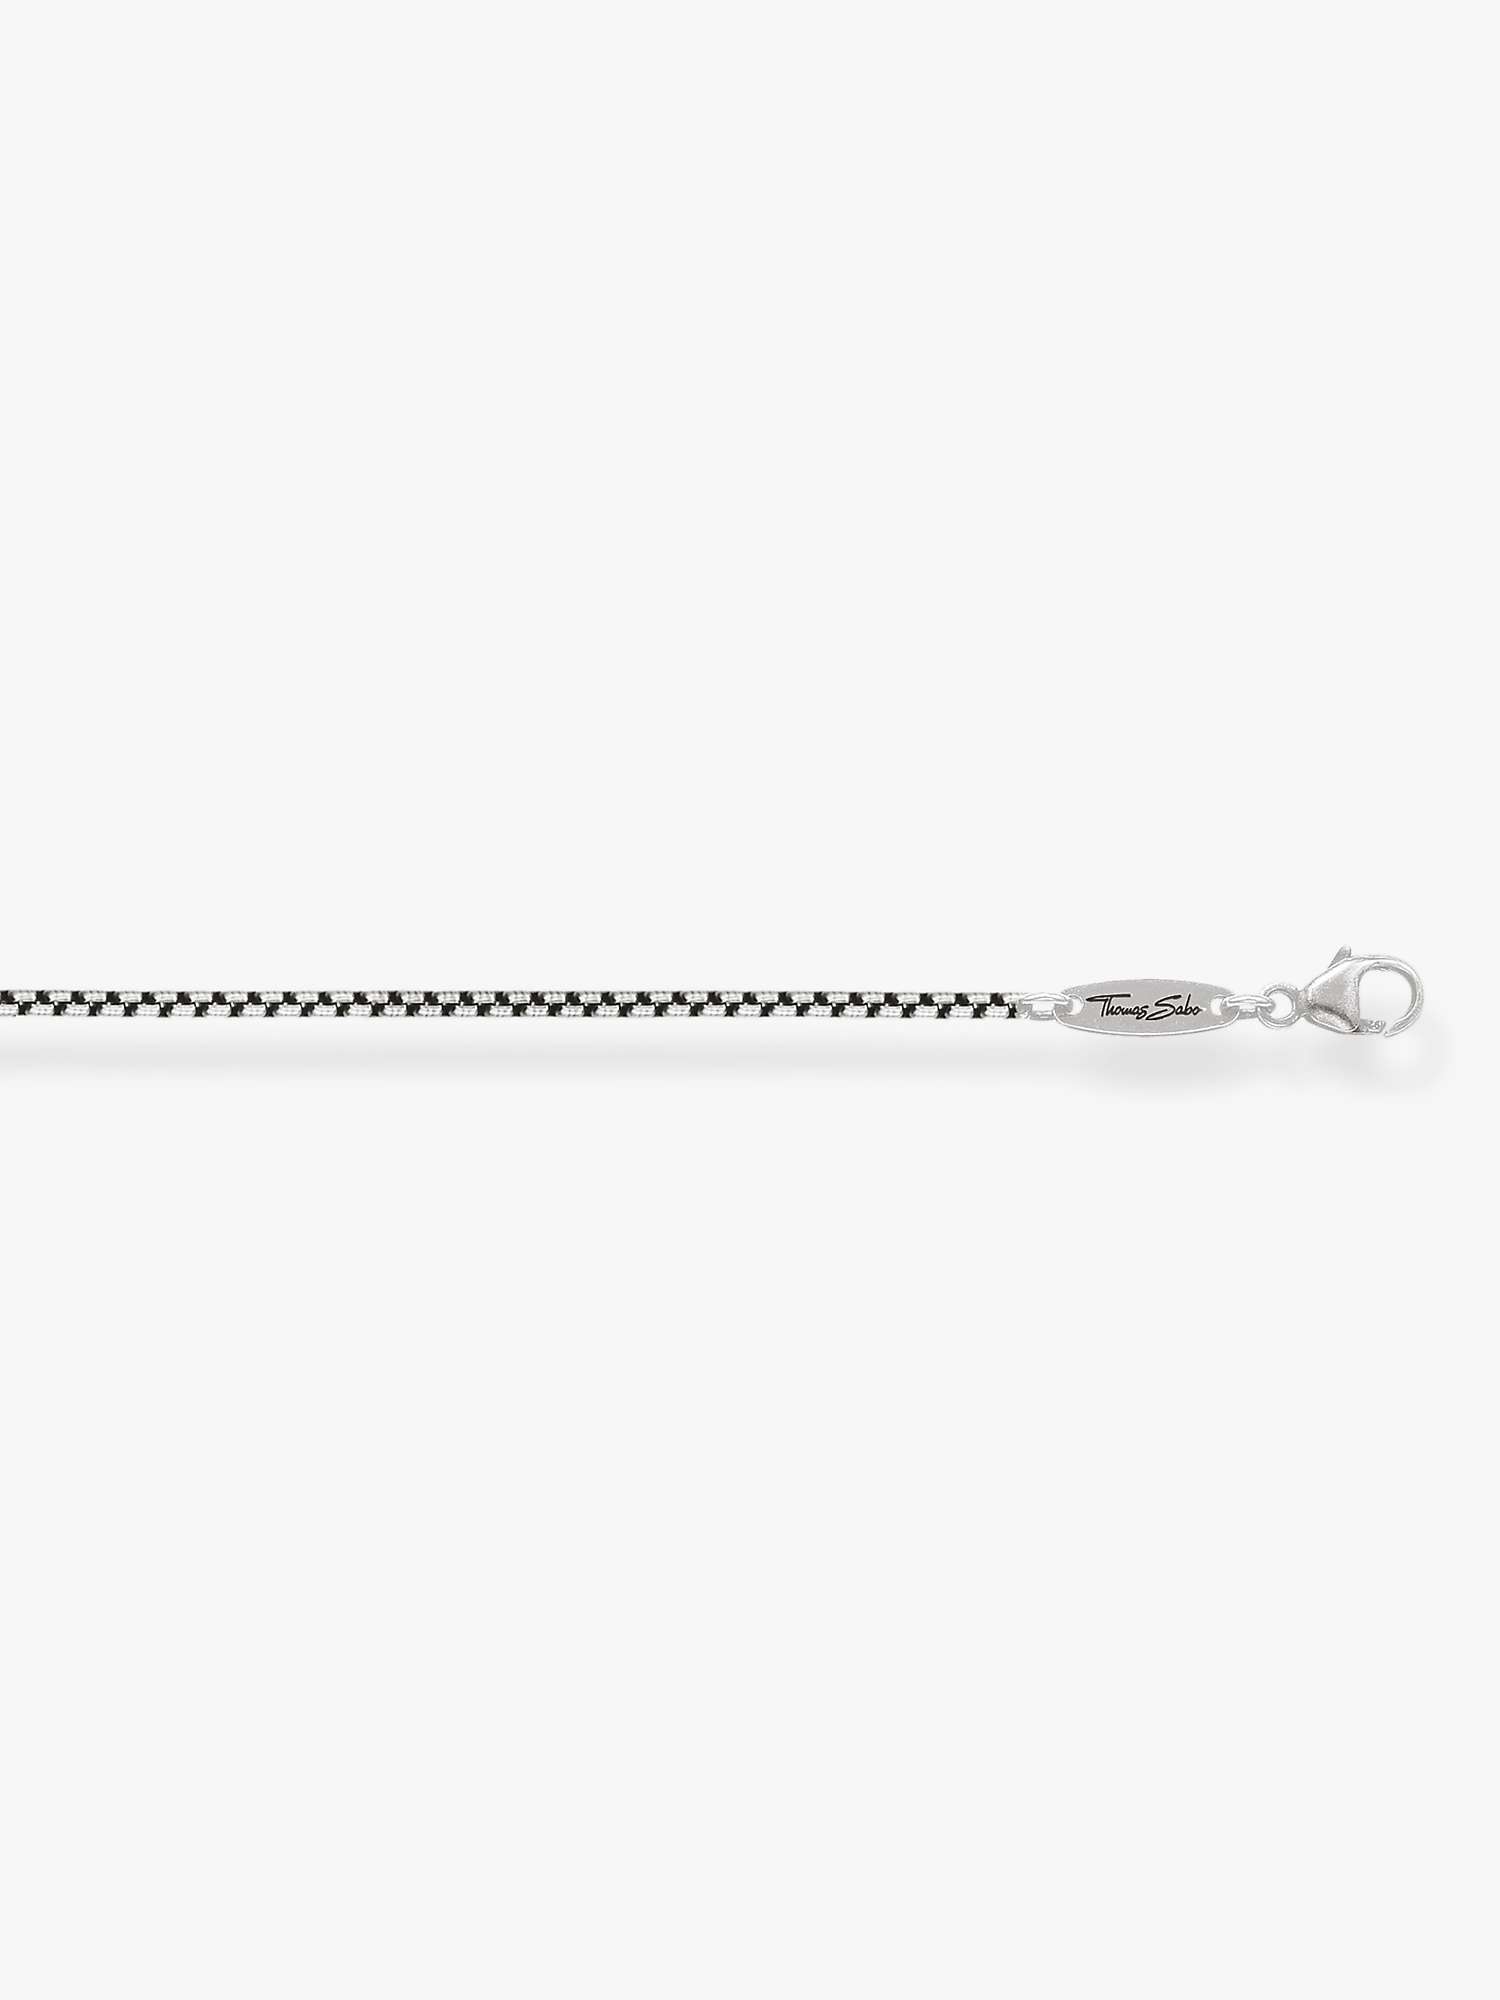 Buy THOMAS SABO Chain Necklace, Silver Online at johnlewis.com